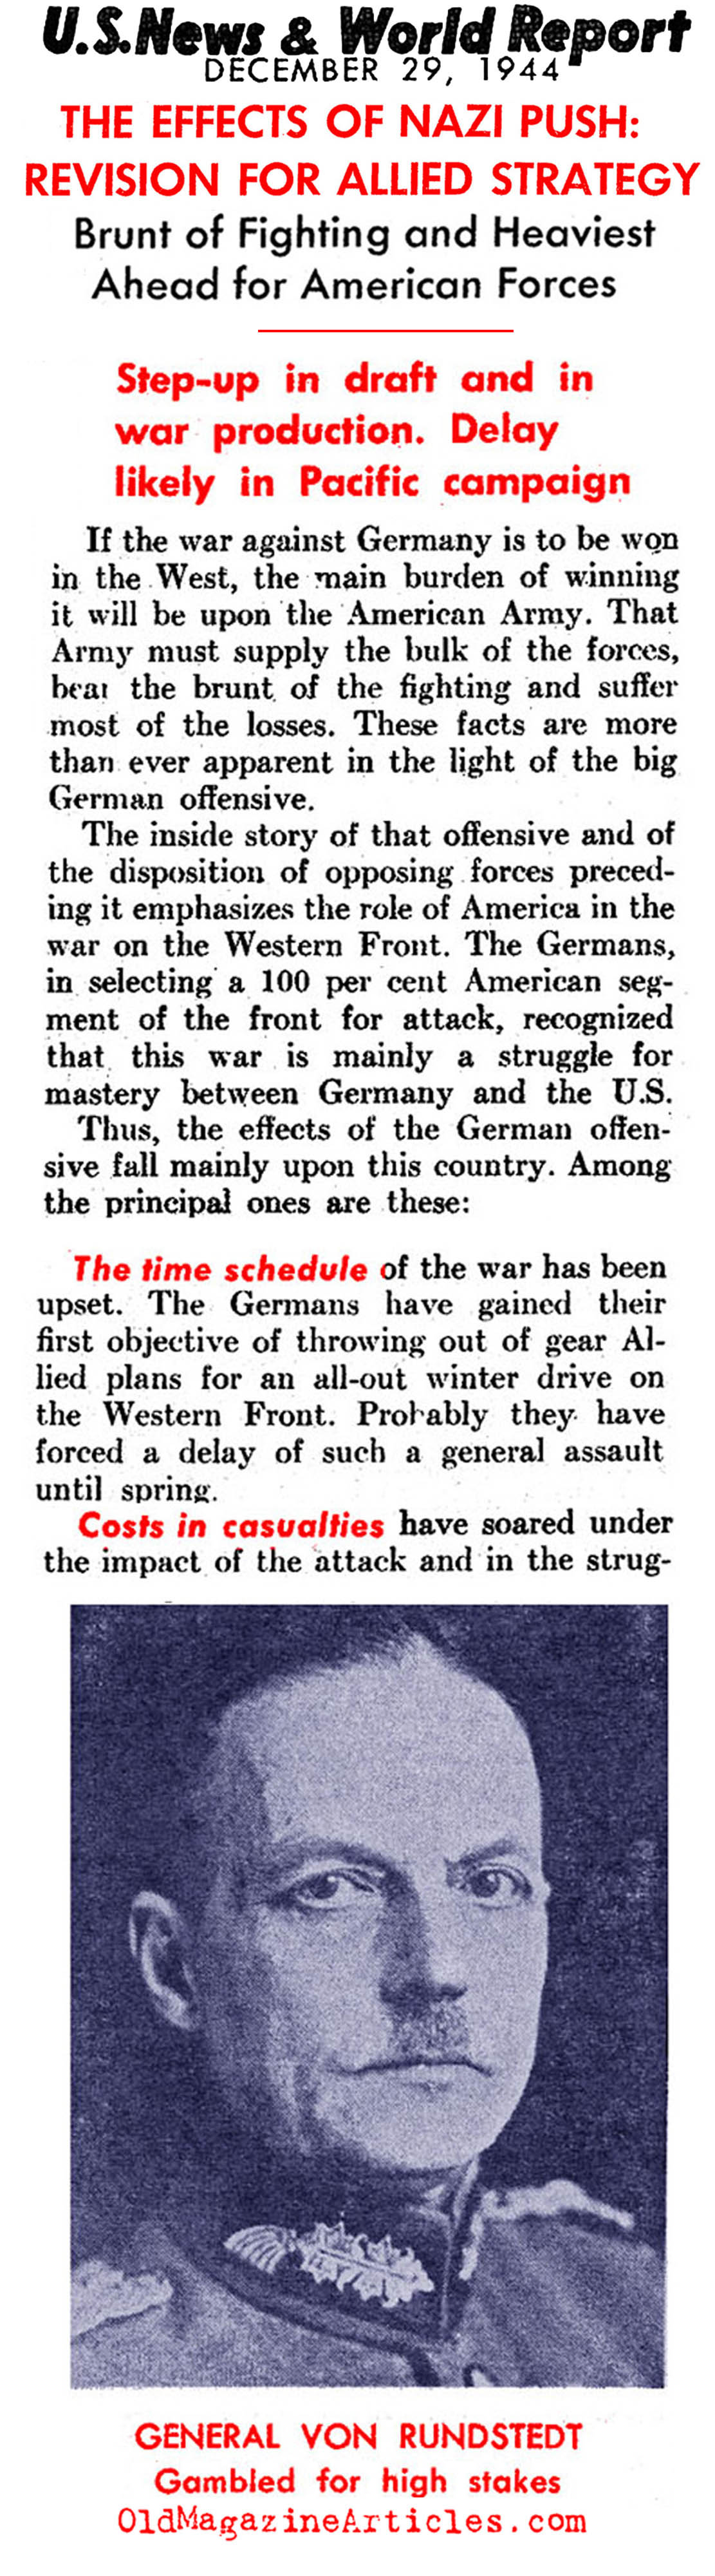 The First Two Weeks of the Battle of the Bulge  (United States News, 1944)